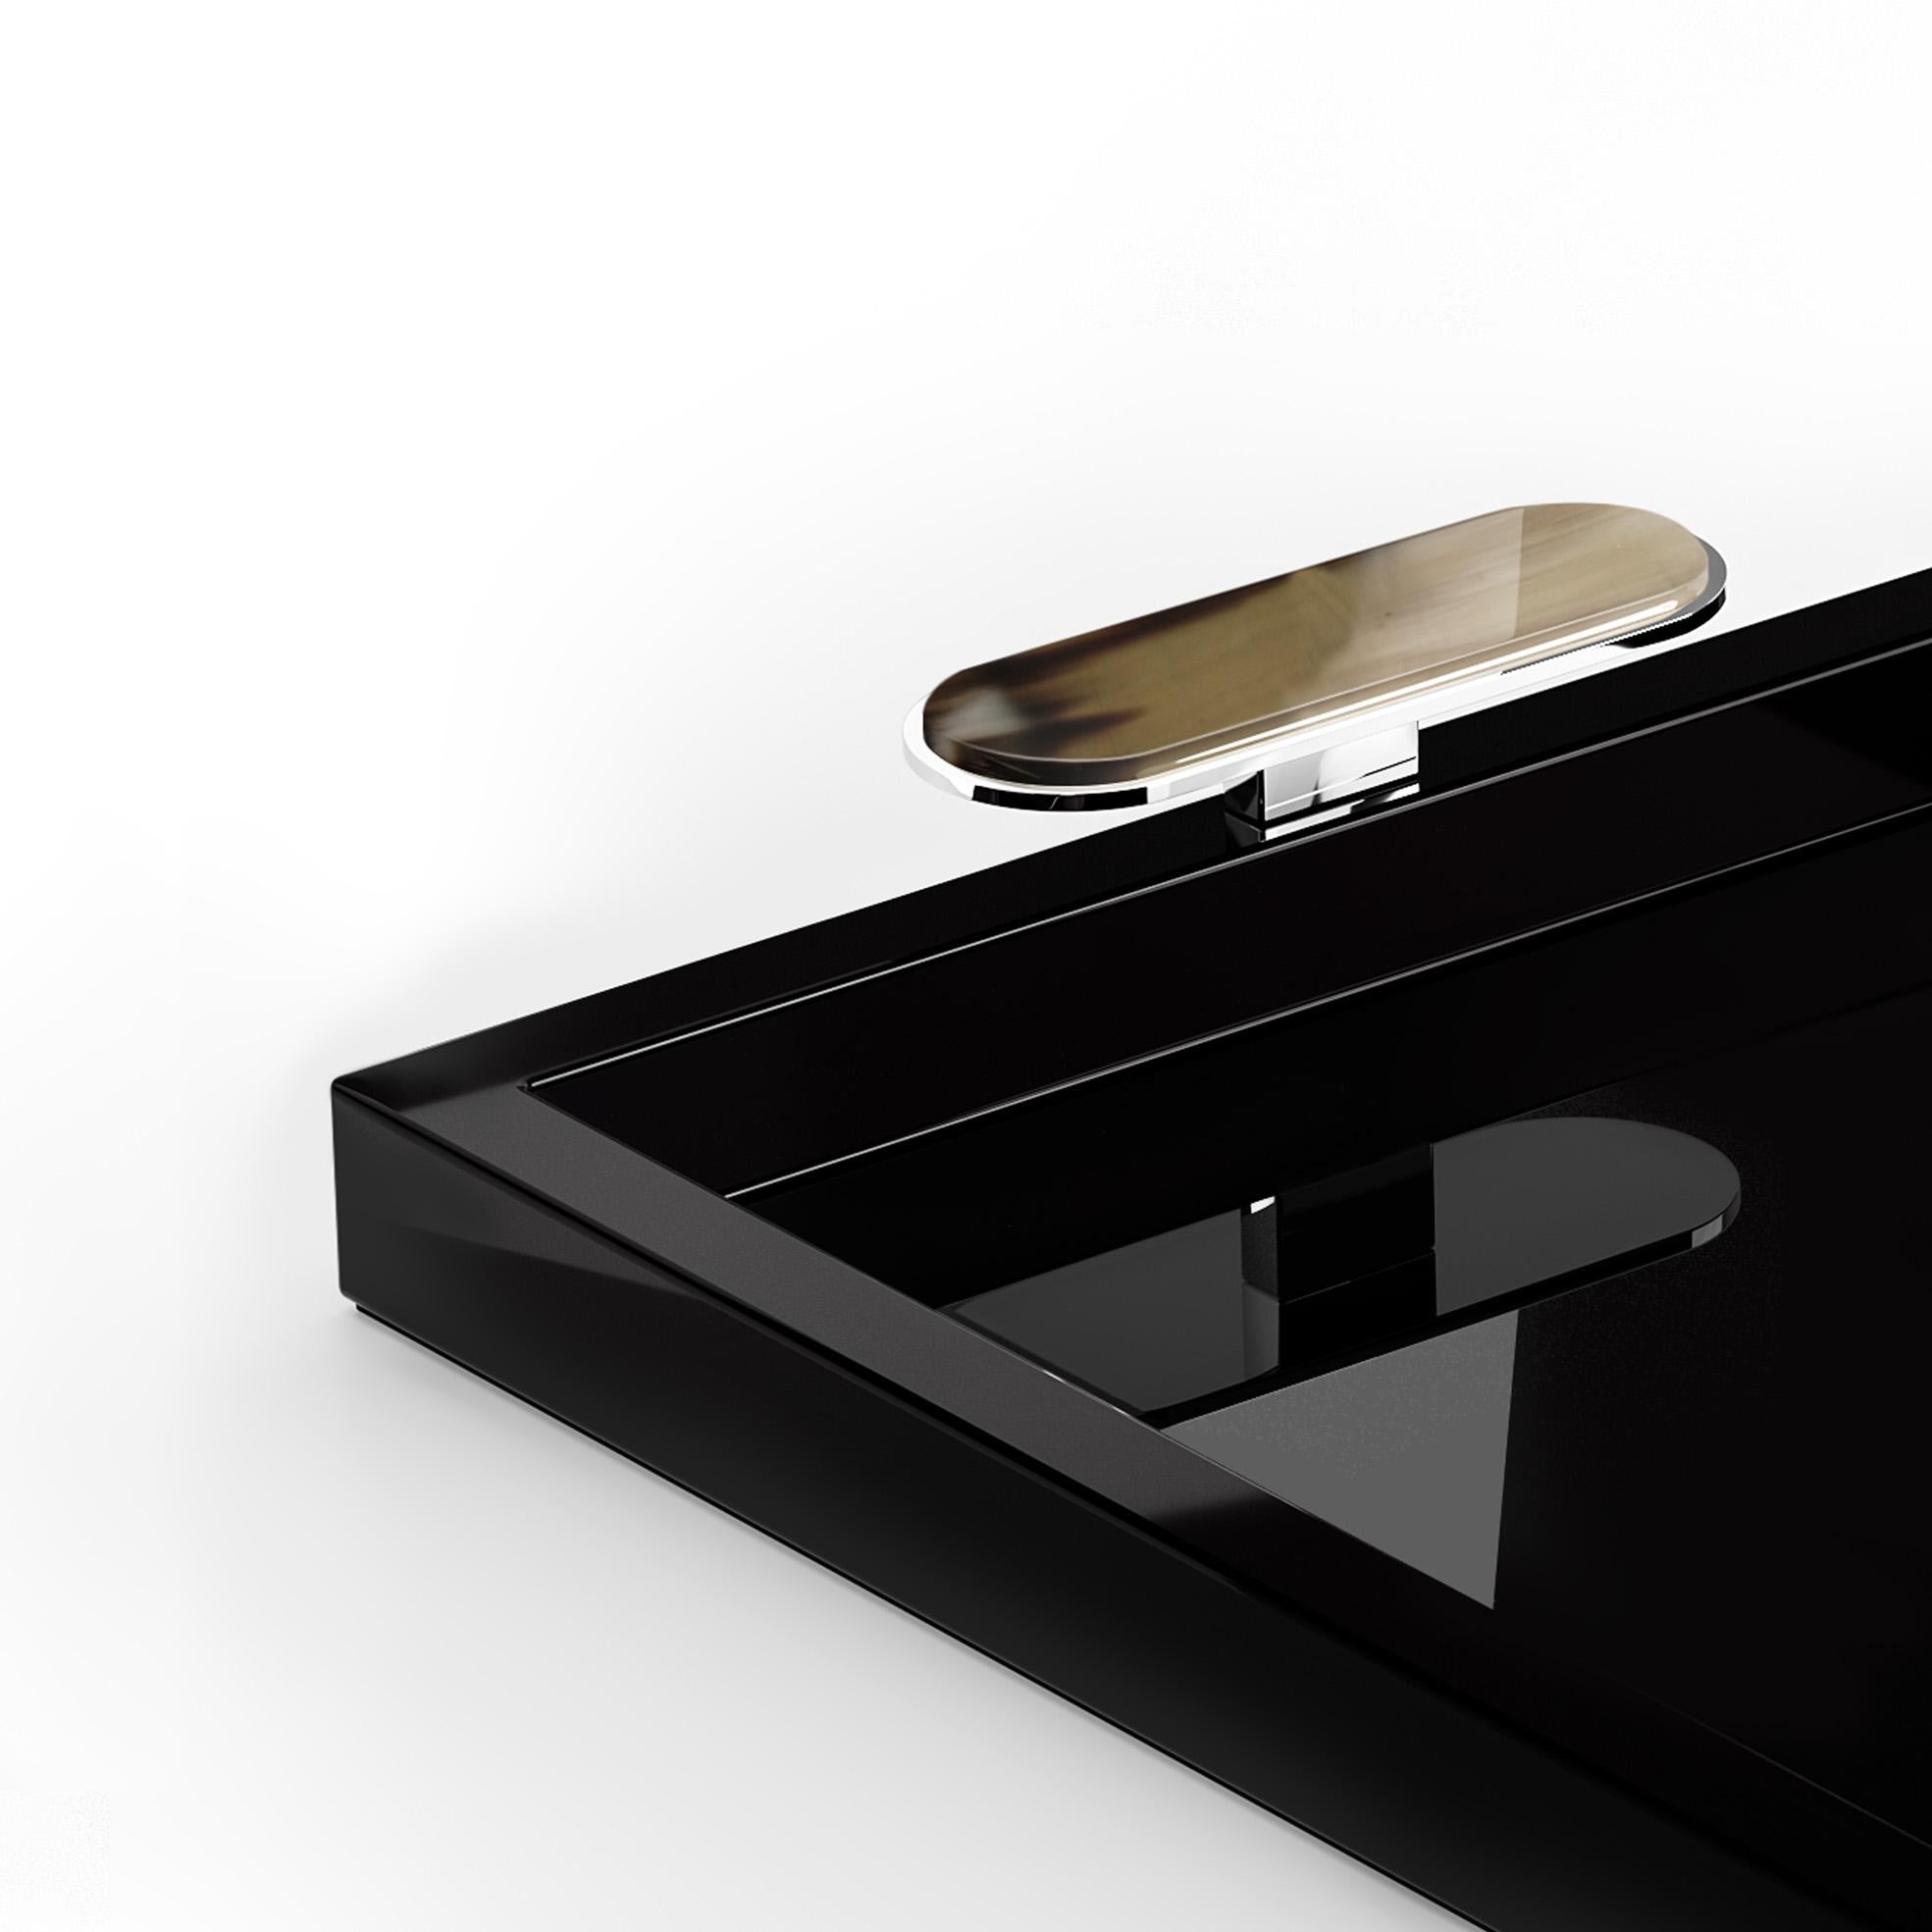 With its timeless elegance, Berro is the perfect tray to enhance your gatherings. Crafted from glossy black lacquered wood, the design is embellished by refined handles in Corno Italiano and chromed brass. Shaped by skilled artisans, the Corno